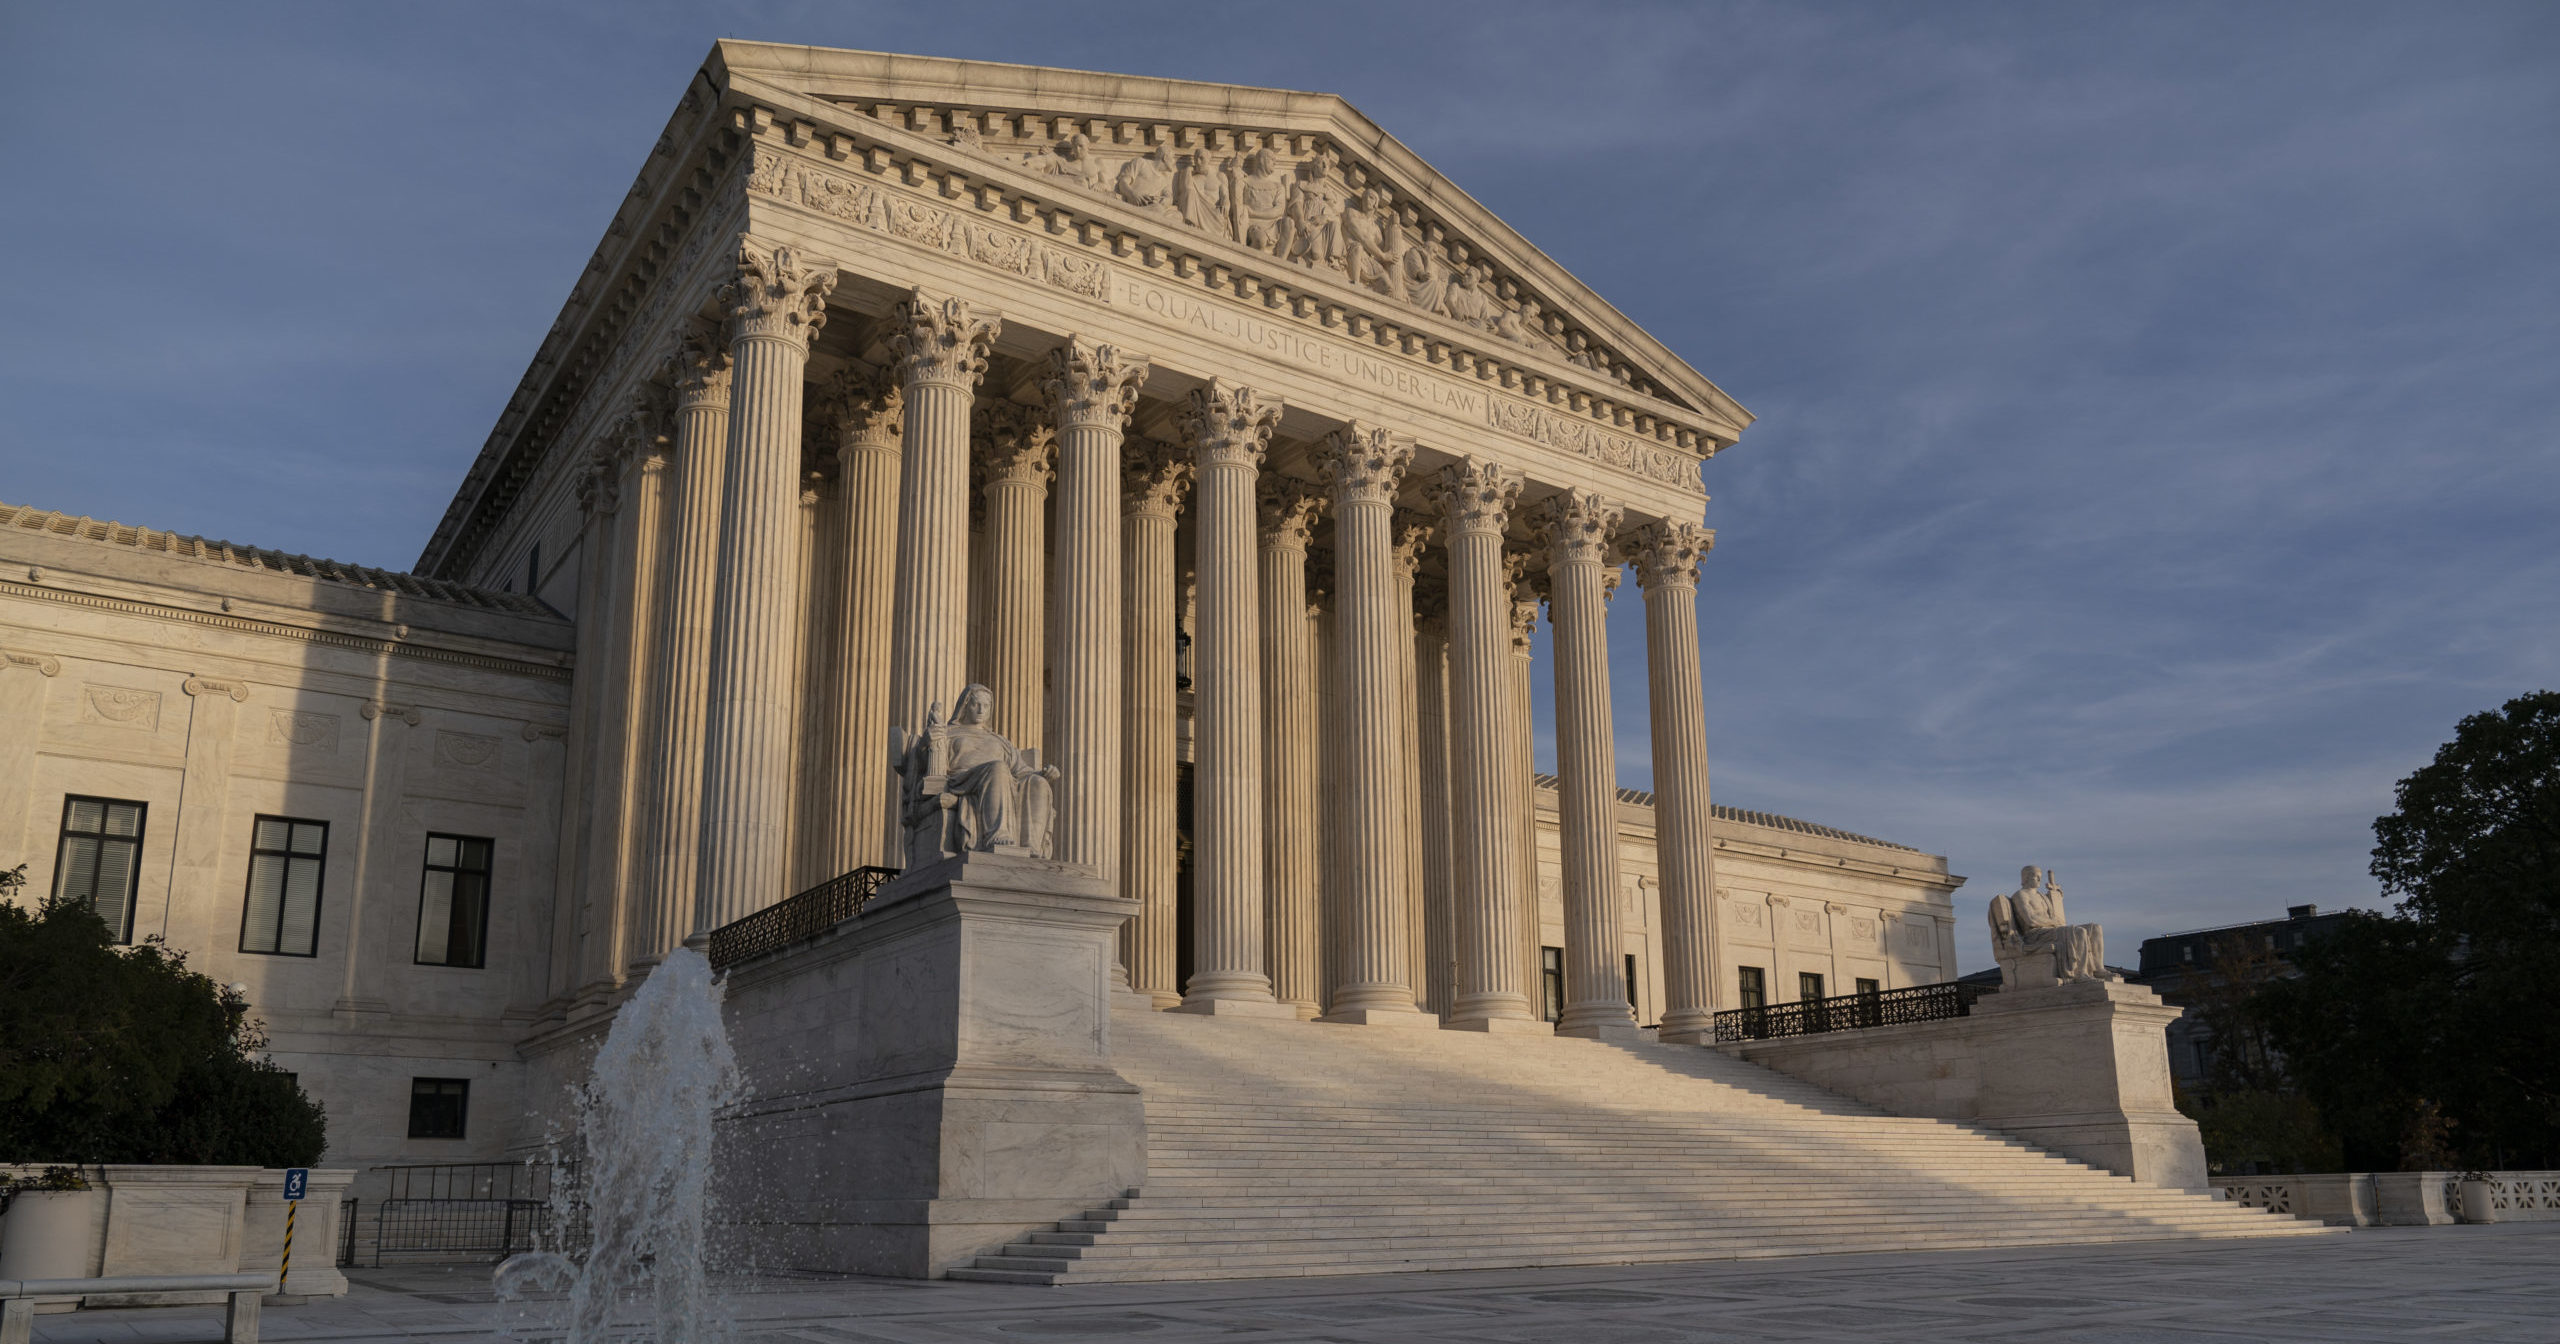 The Supreme Court is seen in Washington, D.C., on Nov. 5, 2020.